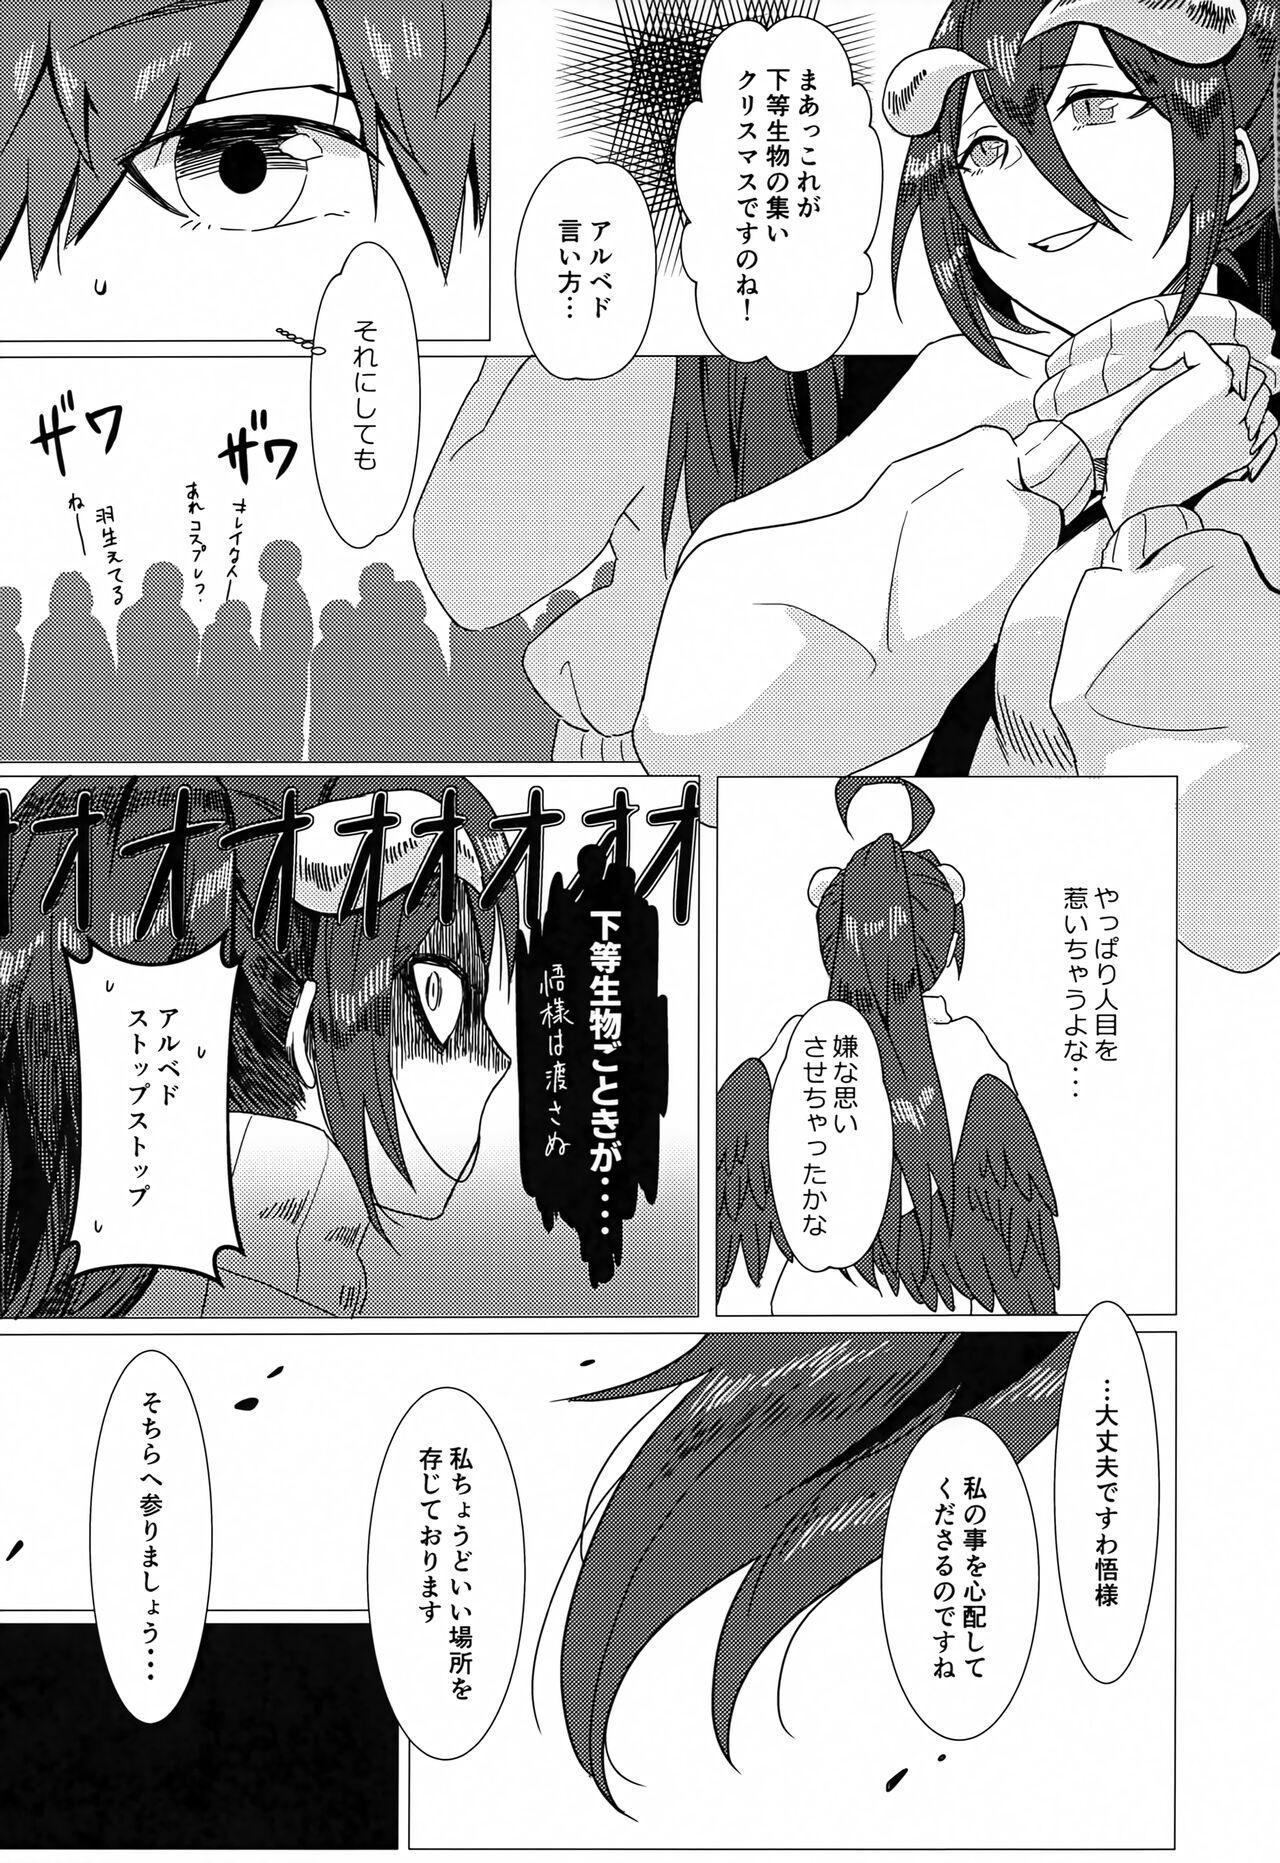 Teen Porn Albedo-san to! 2 - Overlord Story - Page 6